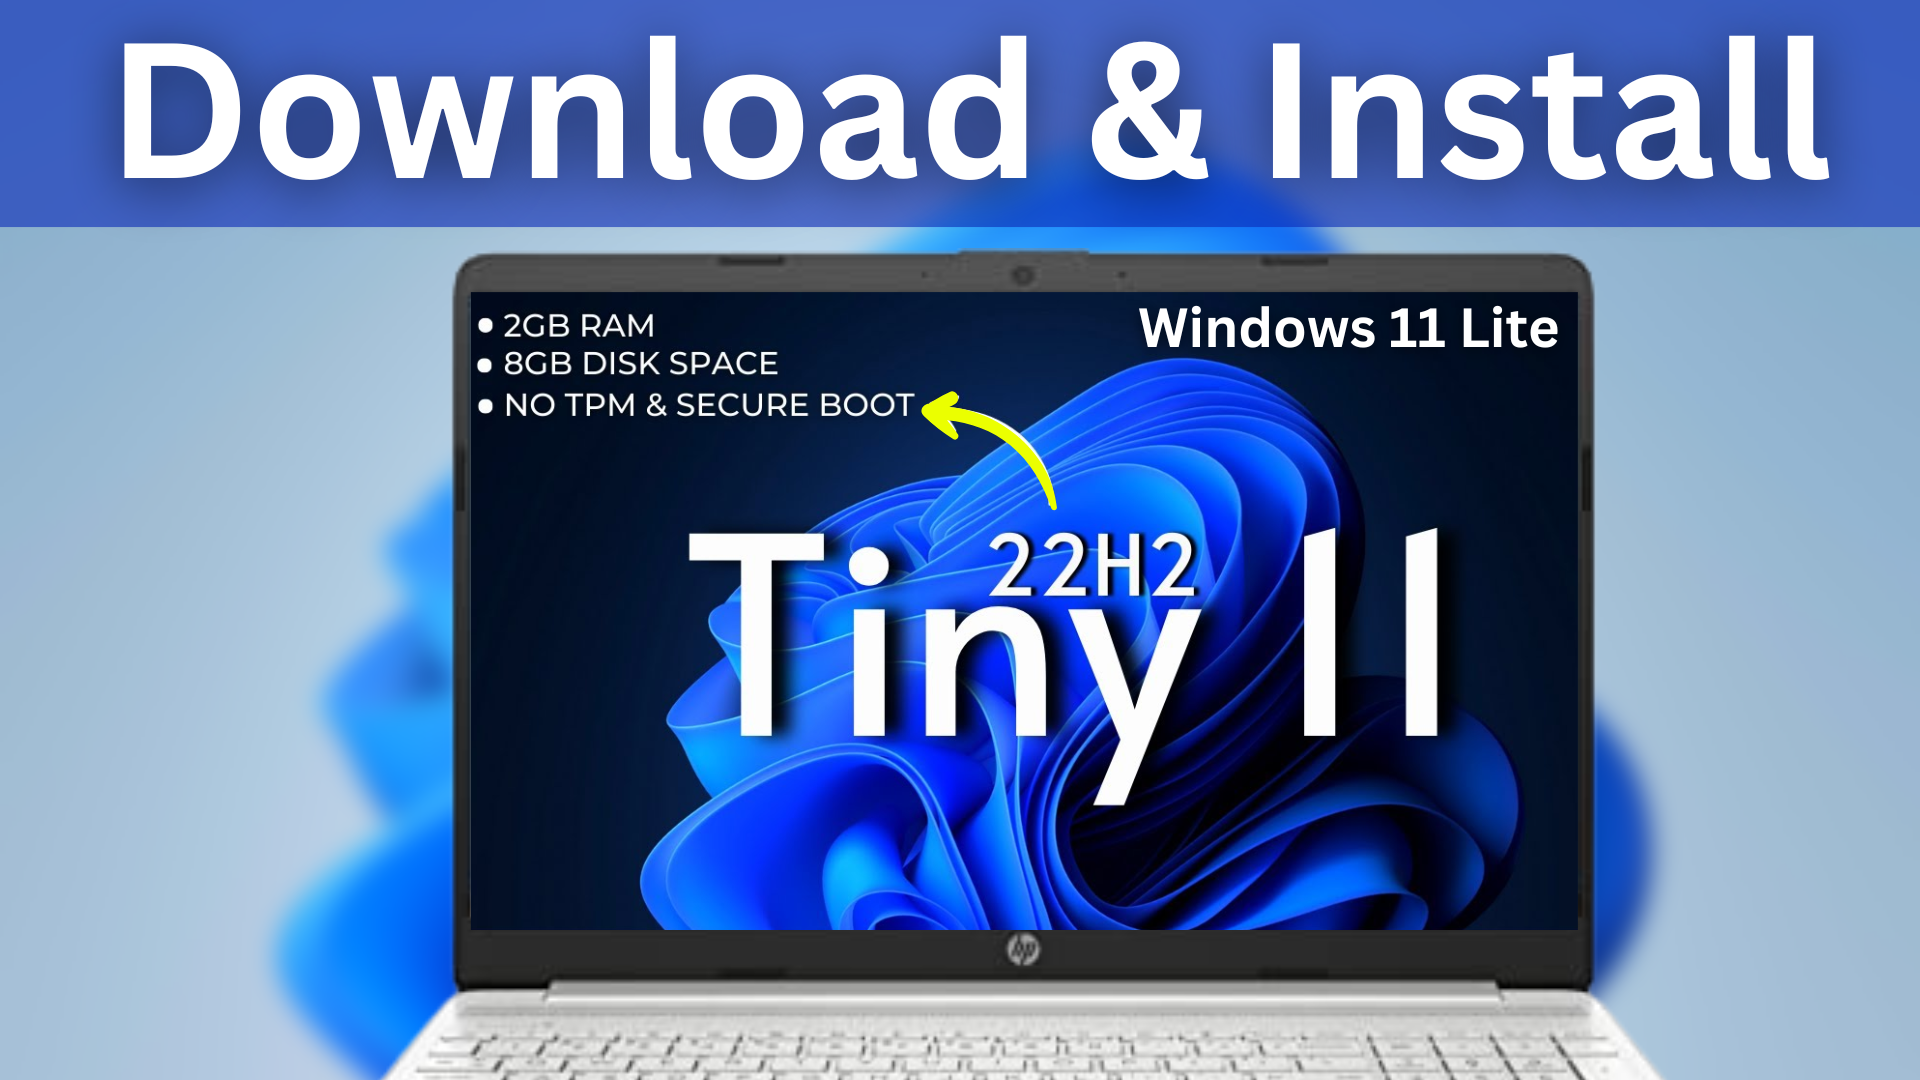 Tiny 11 22H2: Windows 11 Lite — How to Download & Install